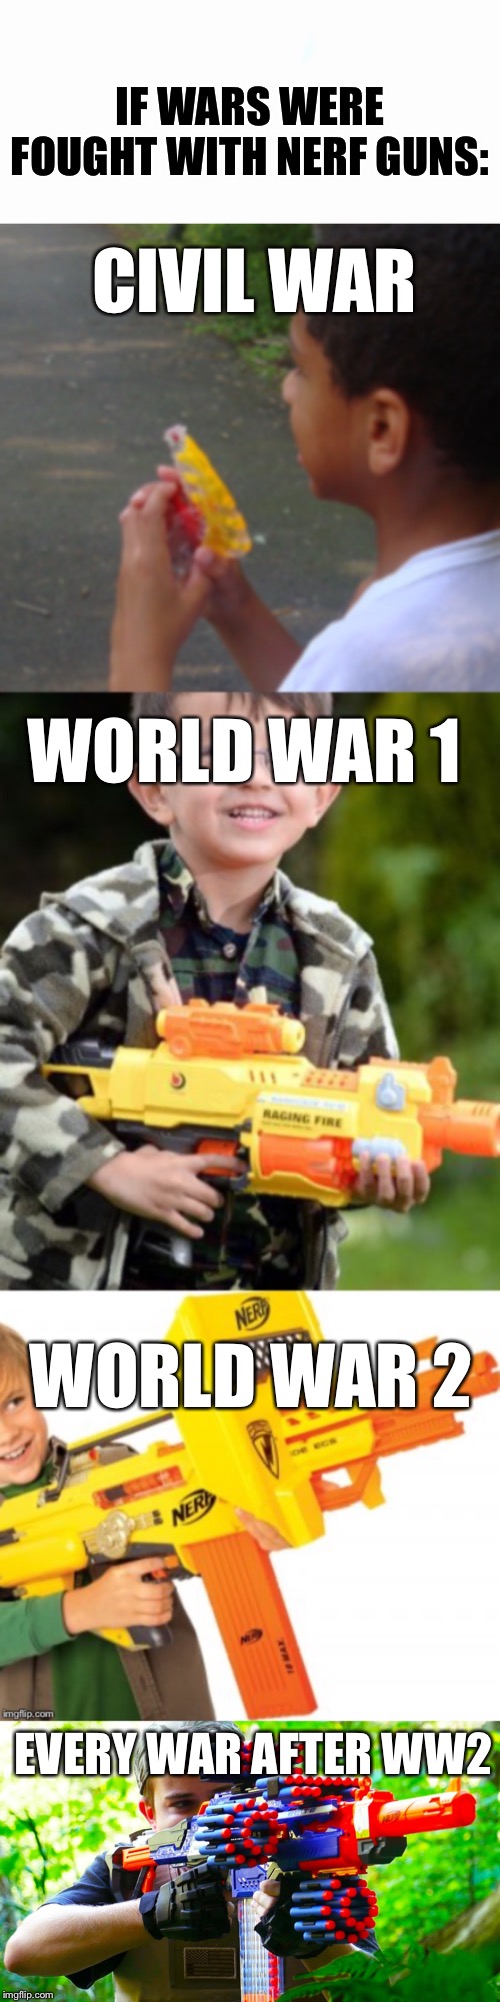 If wars were fought with nerf guns.(I don’t mean any offense to people that served in these wars) |  IF WARS WERE FOUGHT WITH NERF GUNS:; CIVIL WAR; WORLD WAR 1; WORLD WAR 2; EVERY WAR AFTER WW2 | image tagged in nerf,guns,memes | made w/ Imgflip meme maker